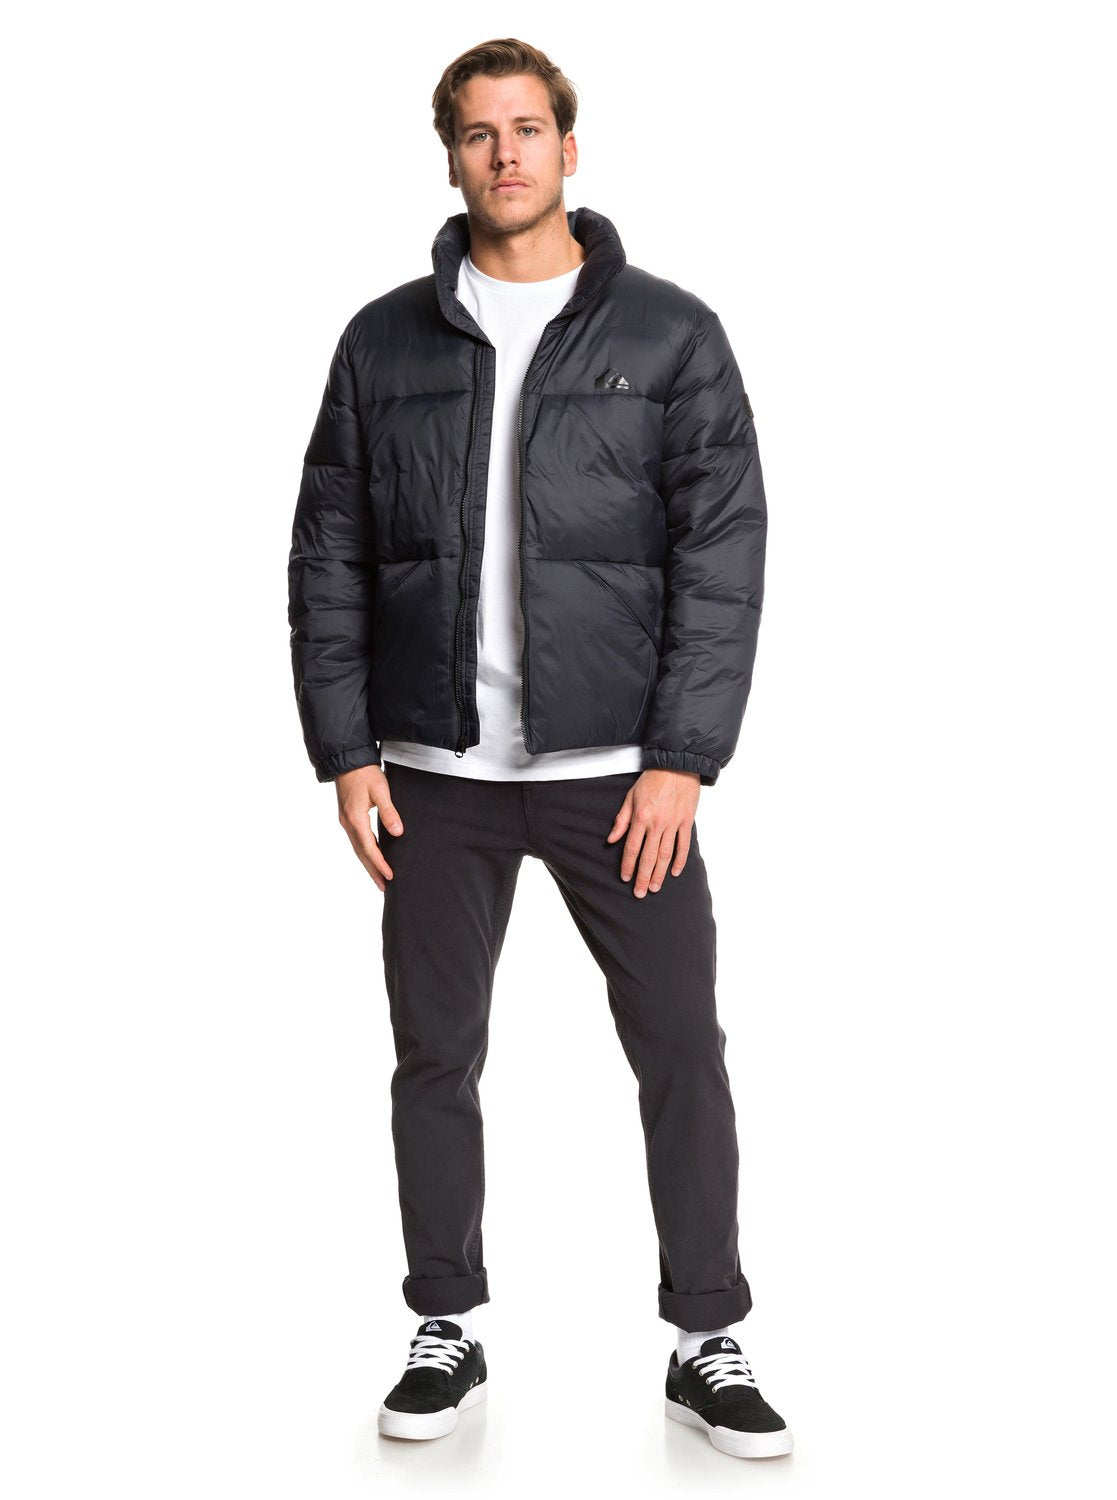 Quiksilver The Outback Puffer Jacket - 88 Gear